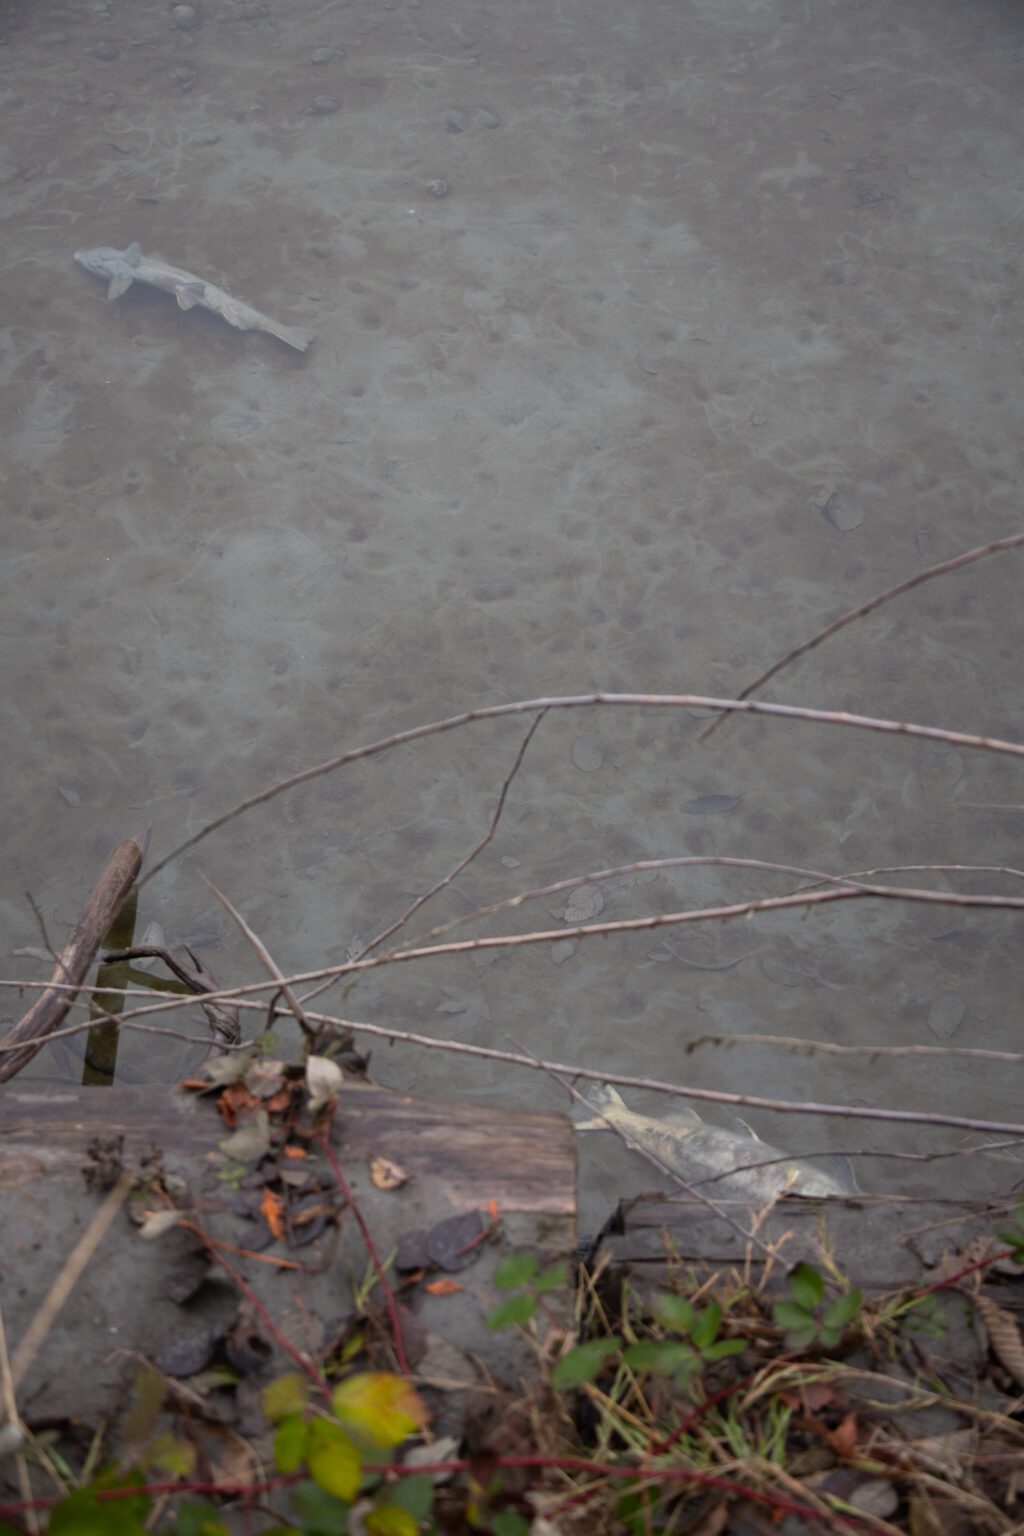 Spawned chum salmon lay near the banks of the Nooksack River in Whatcom County